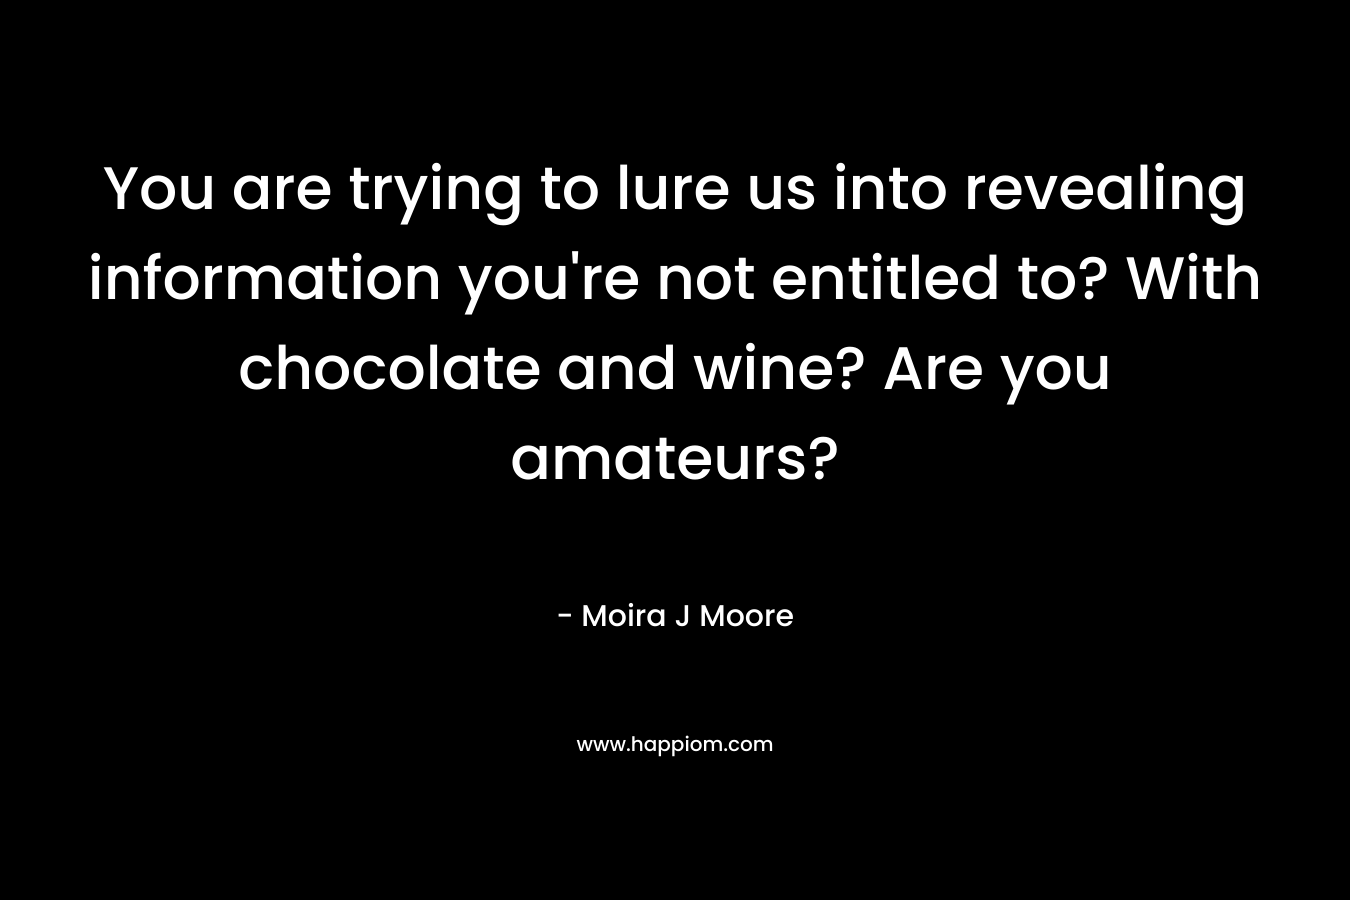 You are trying to lure us into revealing information you’re not entitled to? With chocolate and wine? Are you amateurs? – Moira J Moore